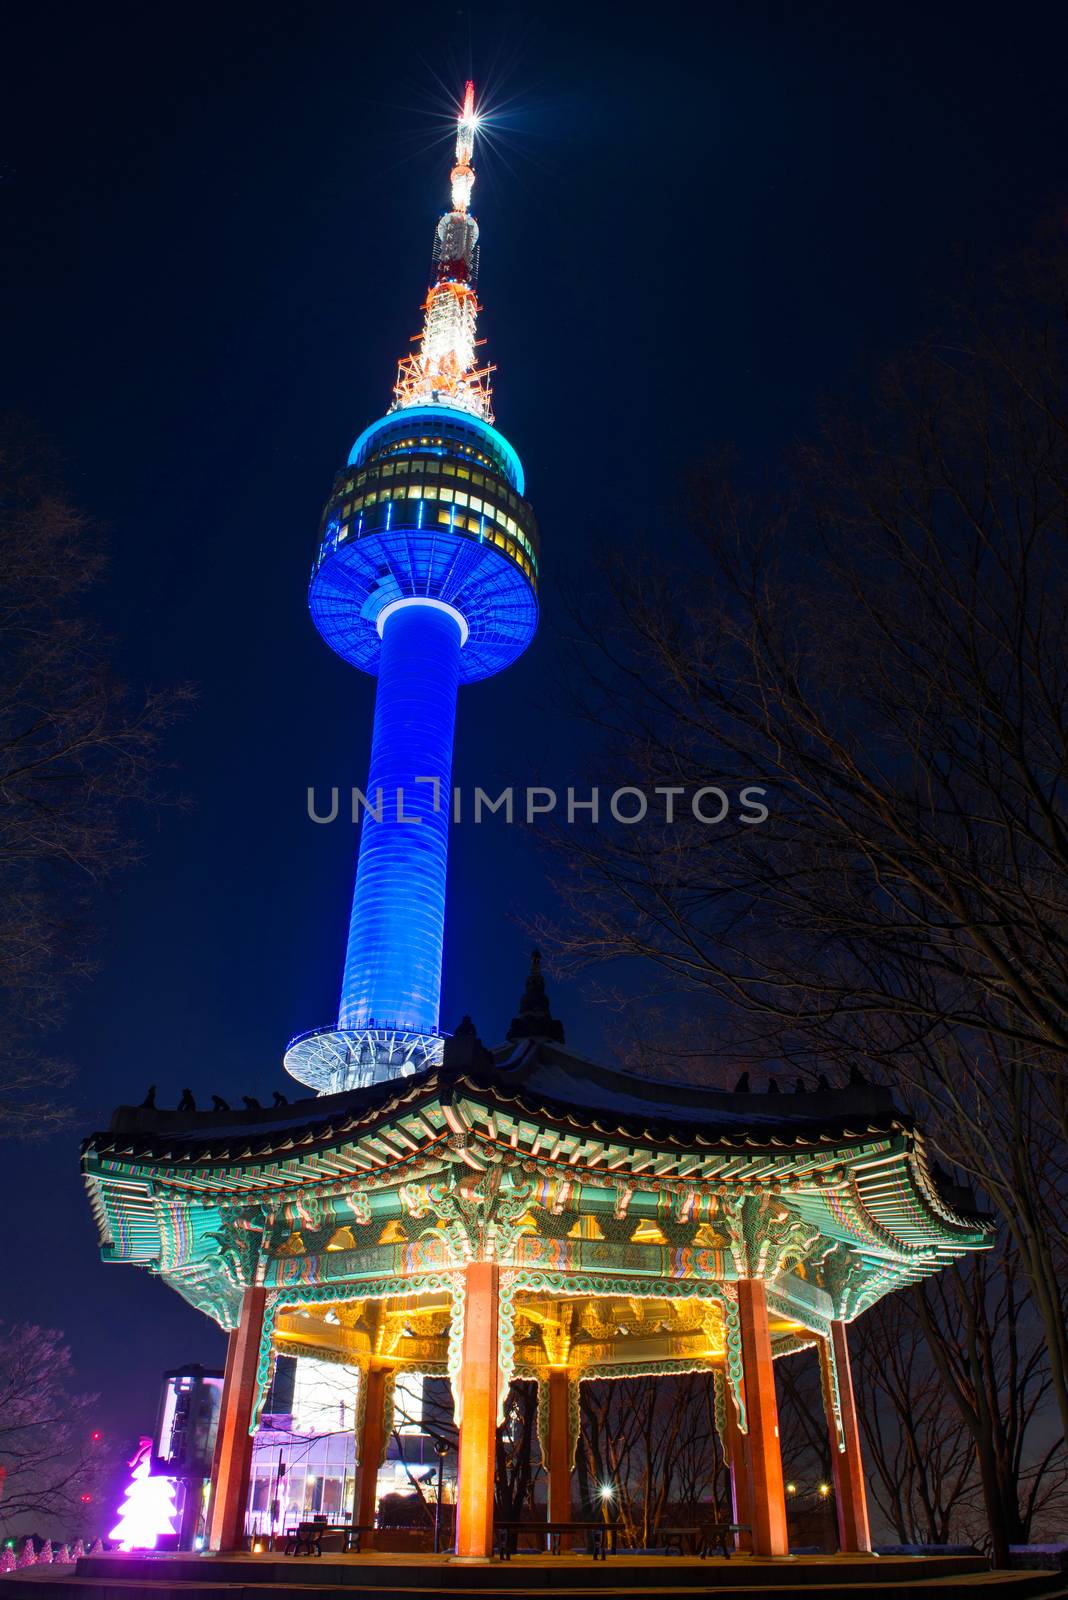 N Seoul Tower. by gutarphotoghaphy